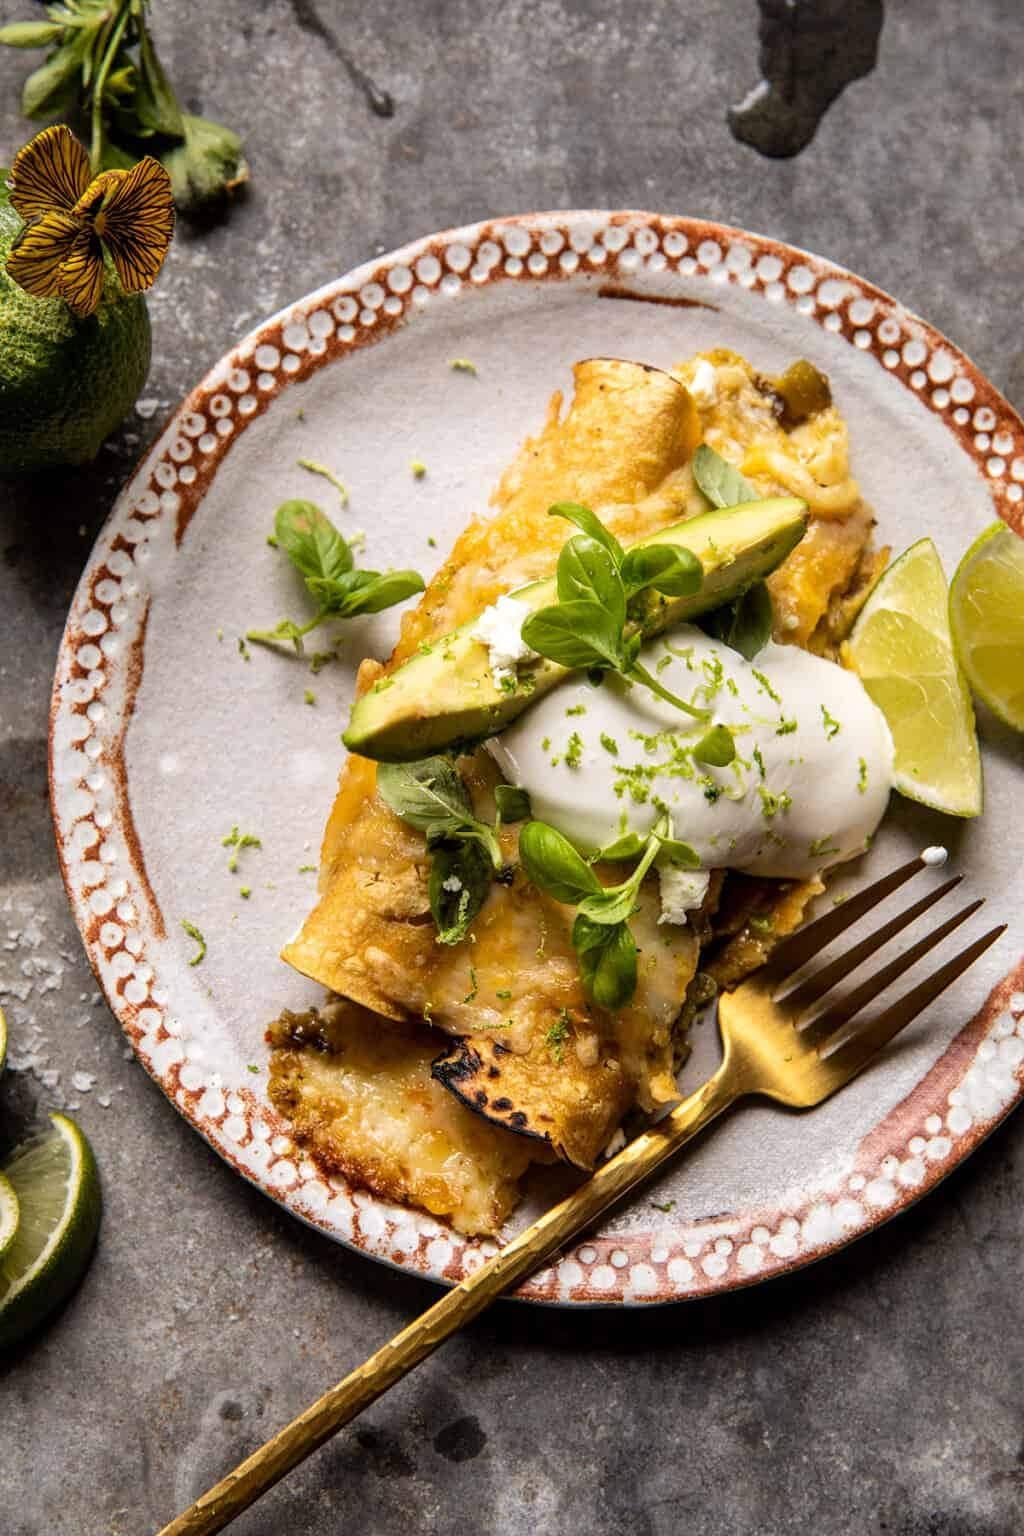 Corn enchiladas topped with sour cream garnished with avocado and lemon slice and fresh herbs.